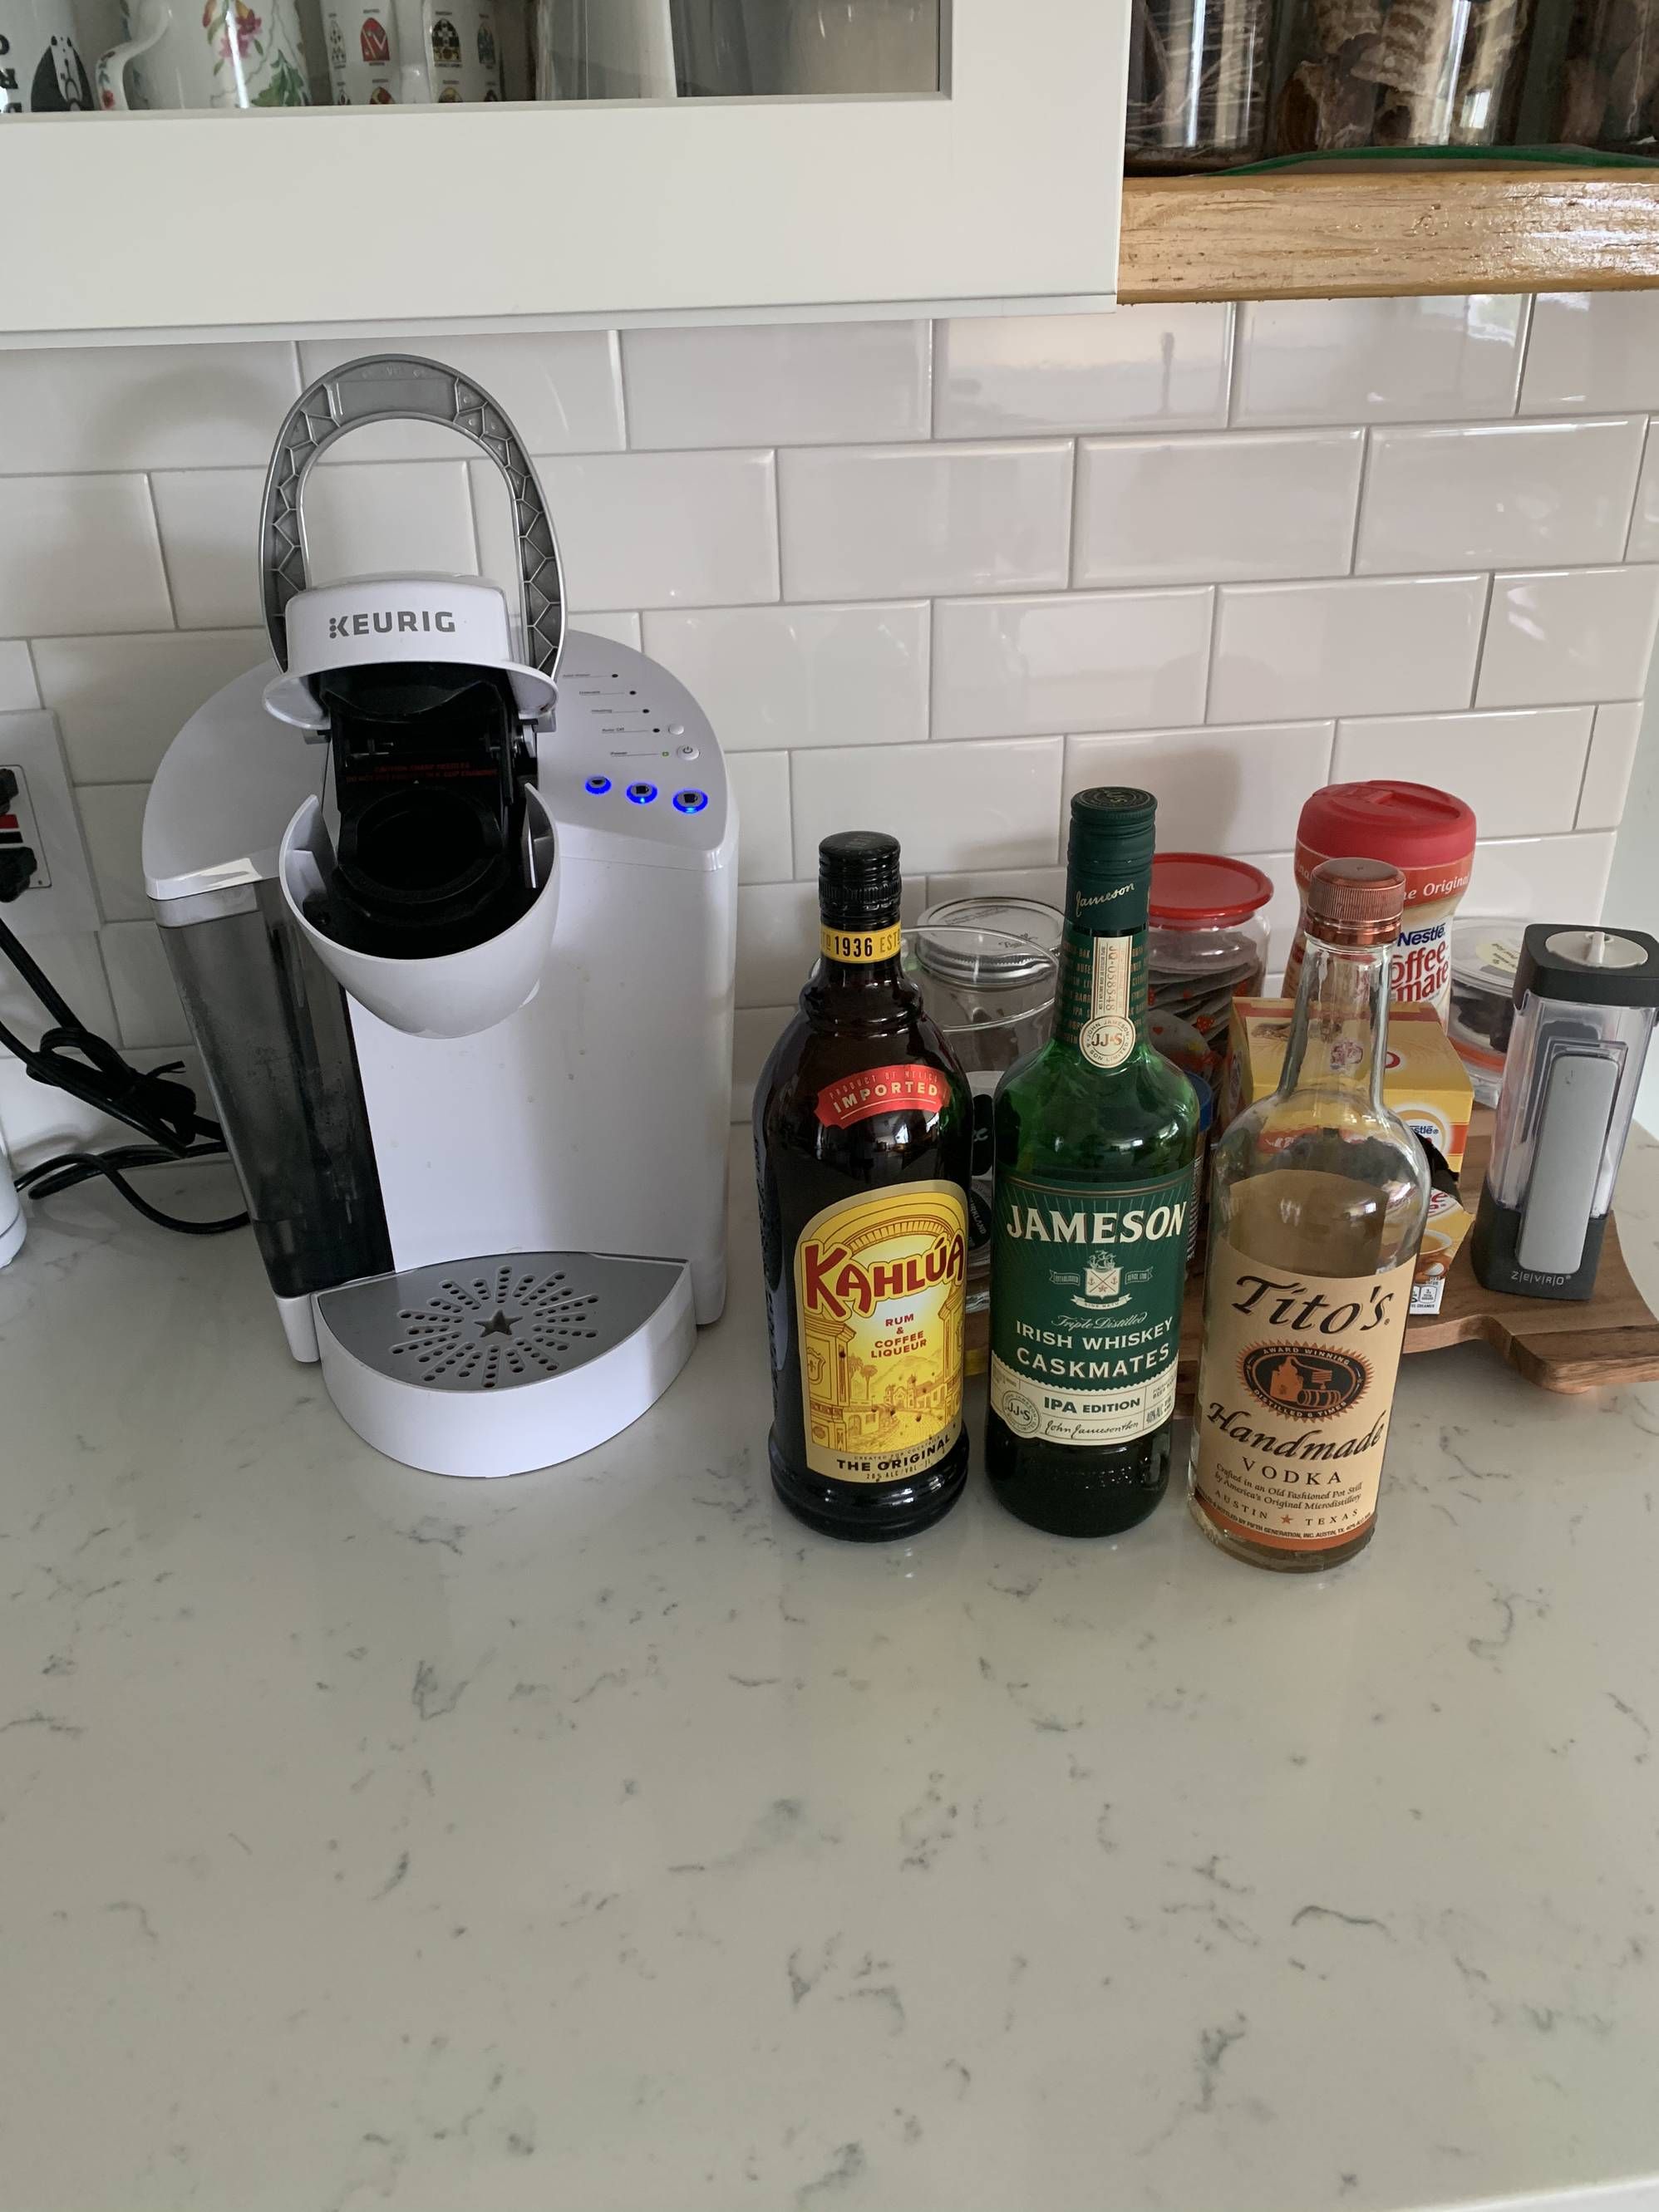 My work from home coffee station.